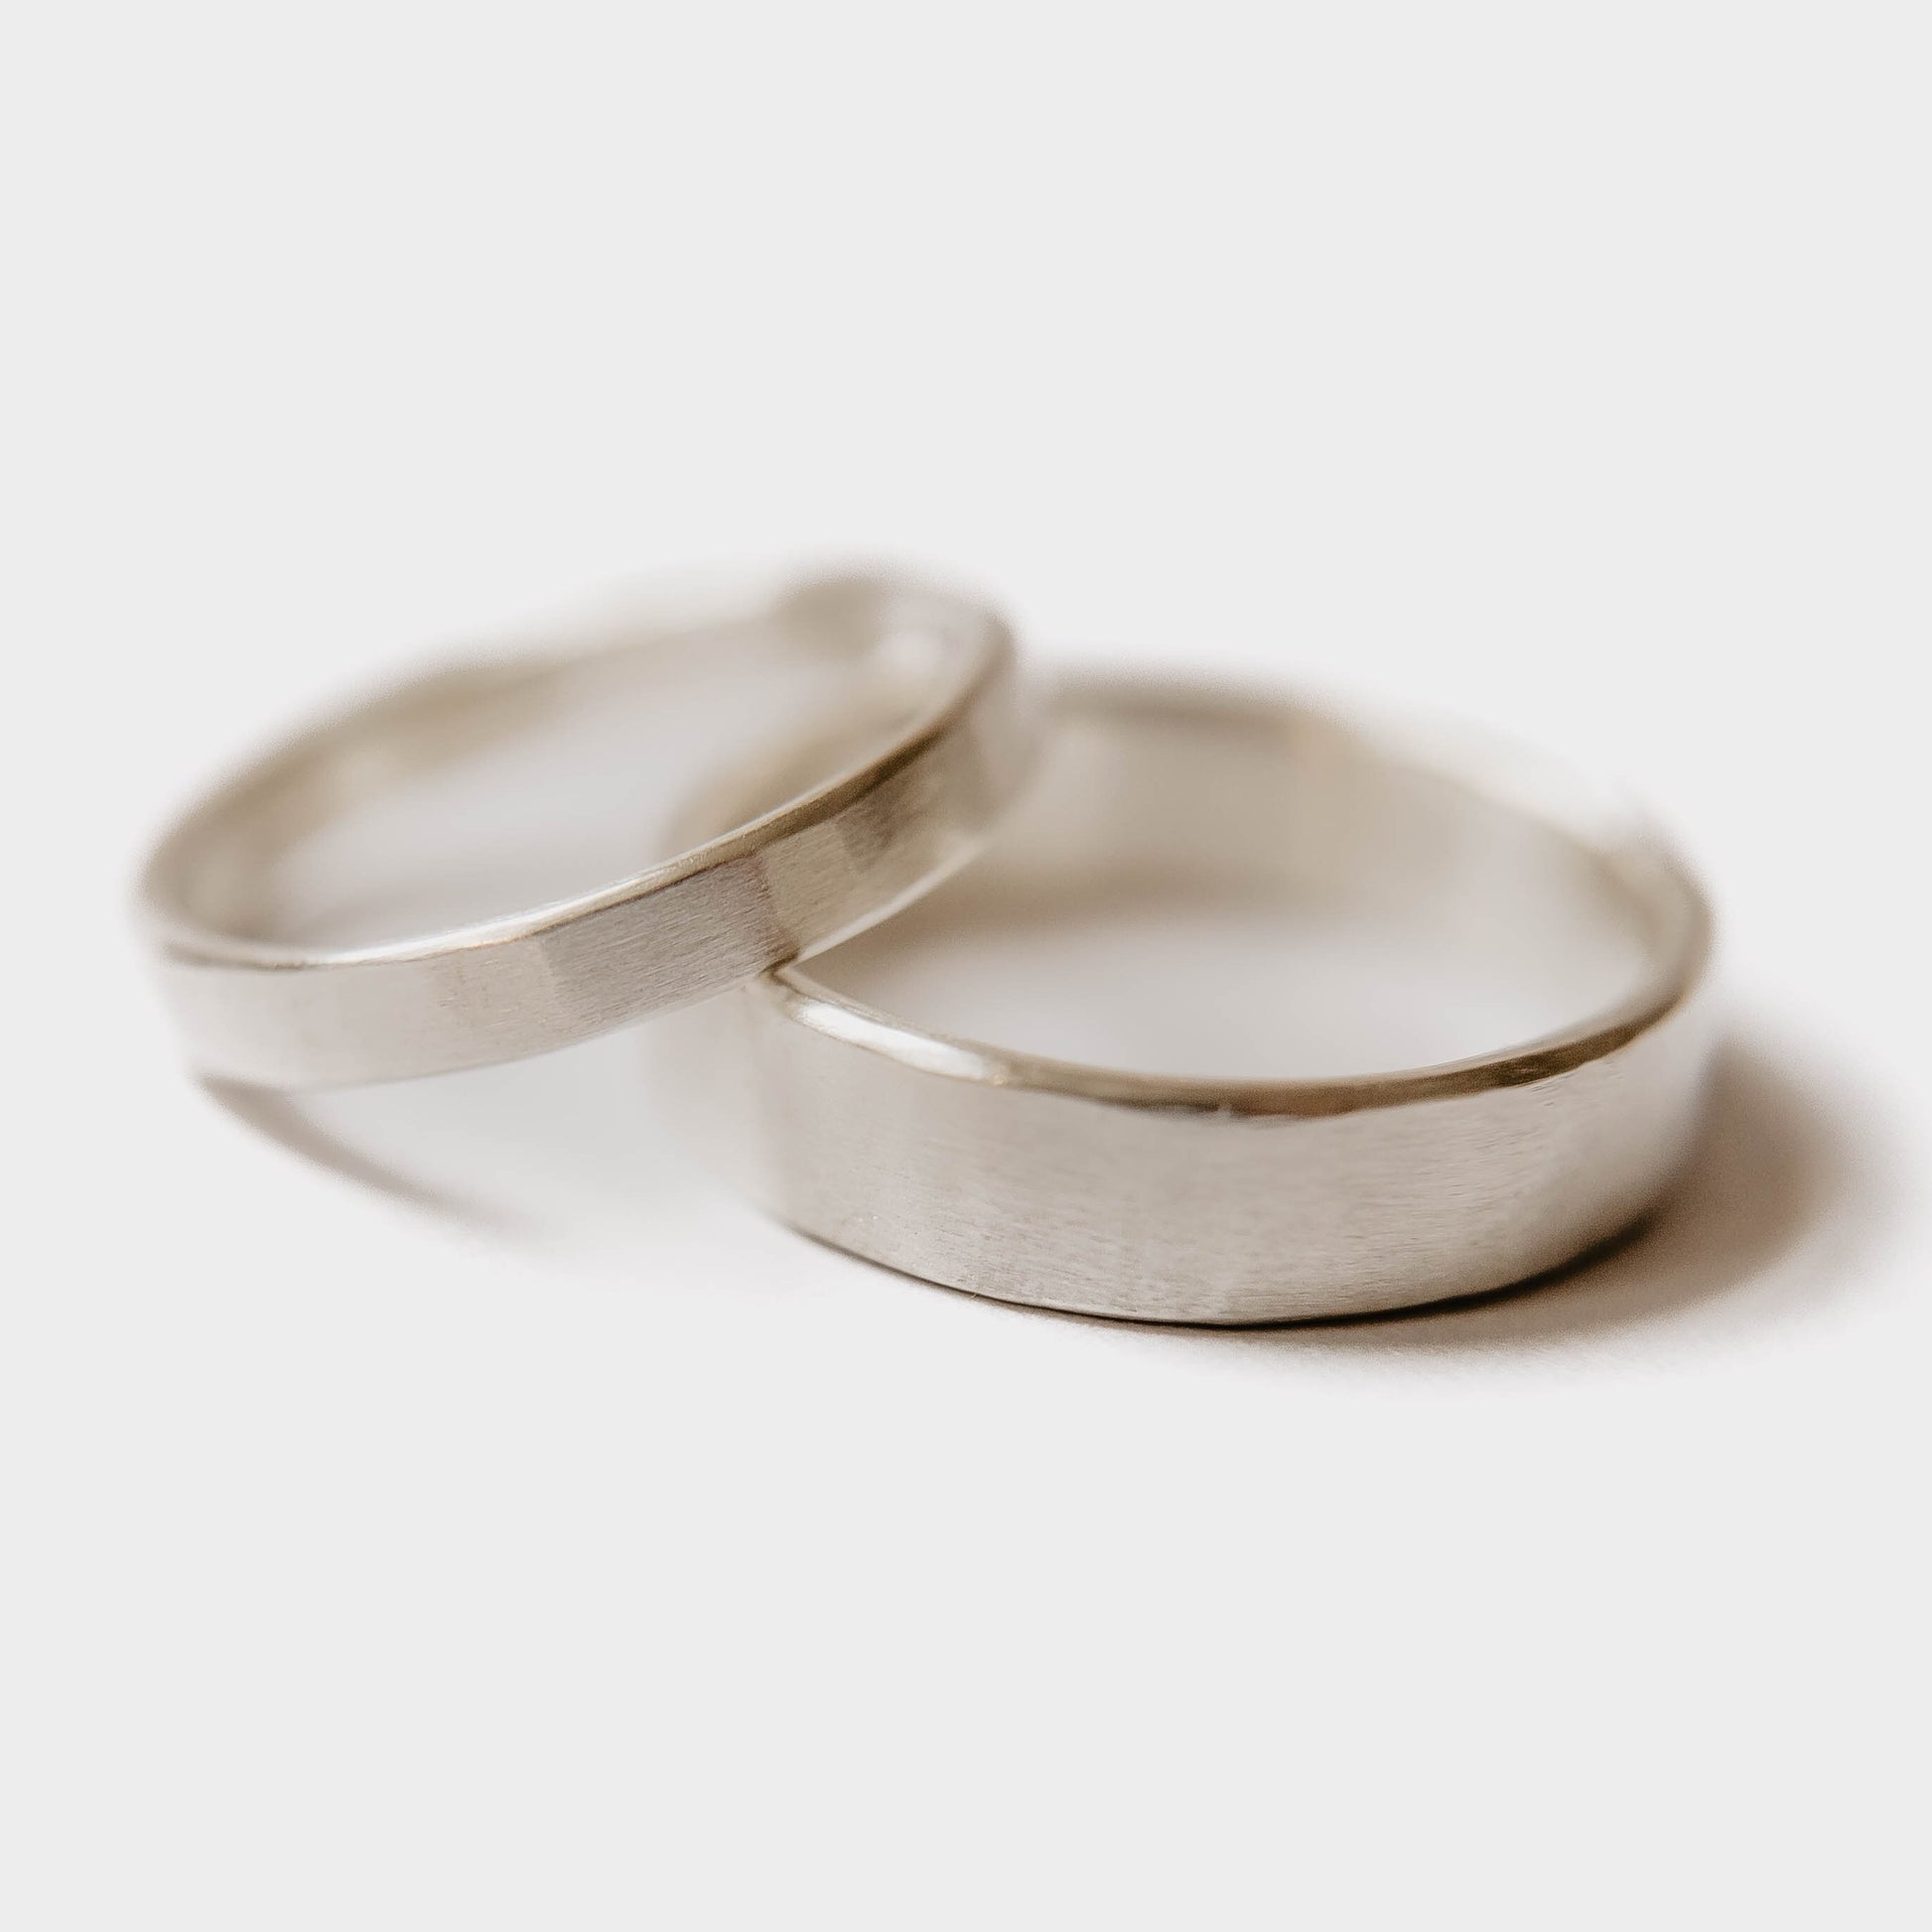 Handmade Silver Wedding Band Set. This photo shows two forged sterling silver rings. (Mens band horizontal Womens band horizontal with white background)